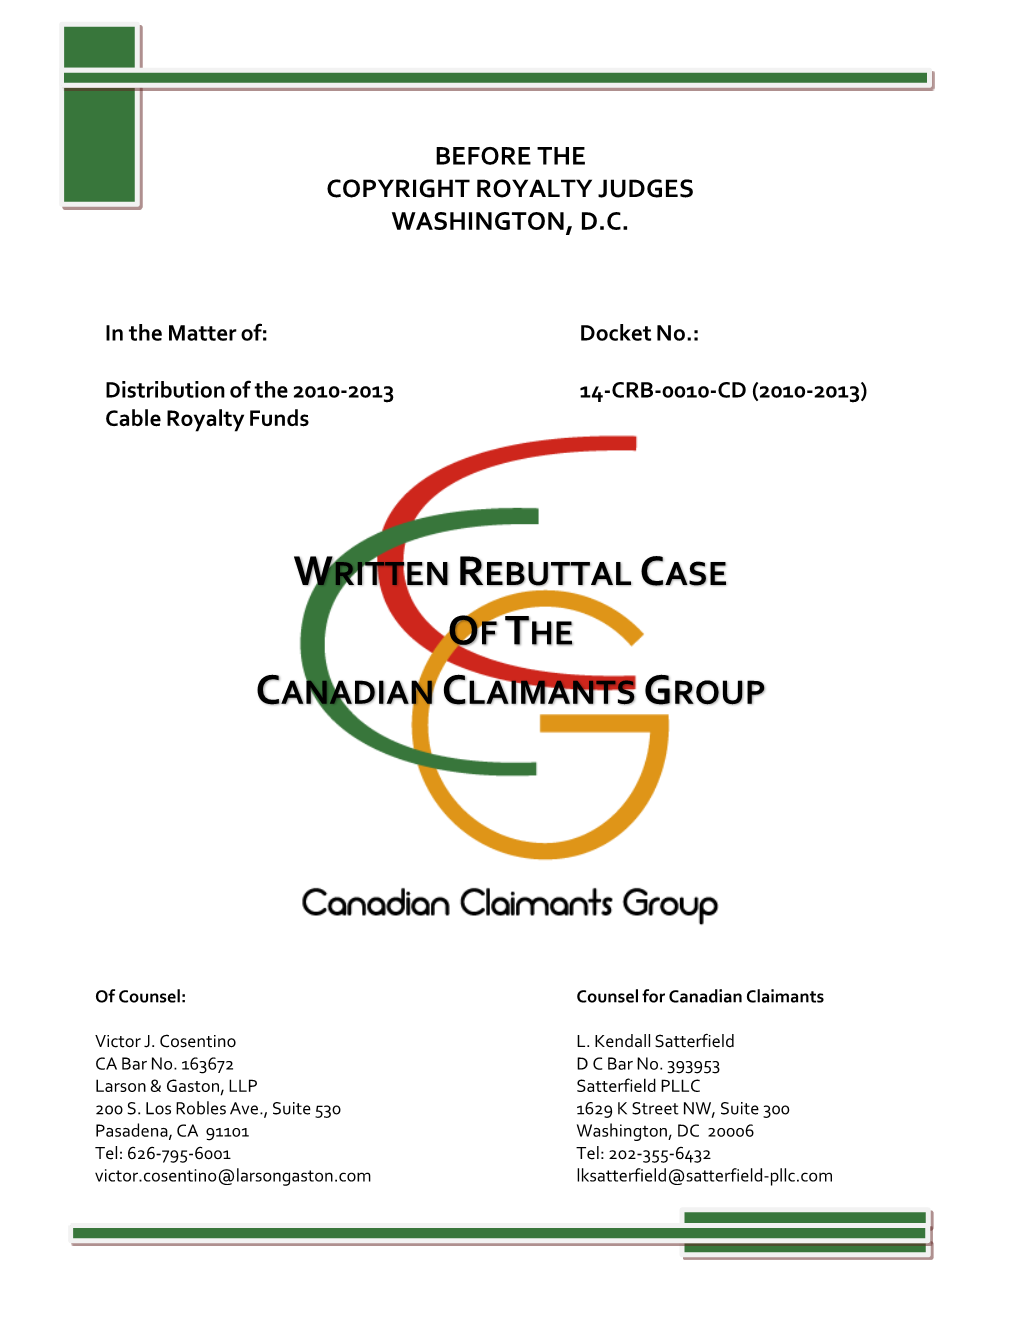 Written Rebuttal Case of the Canadian Claimants Group